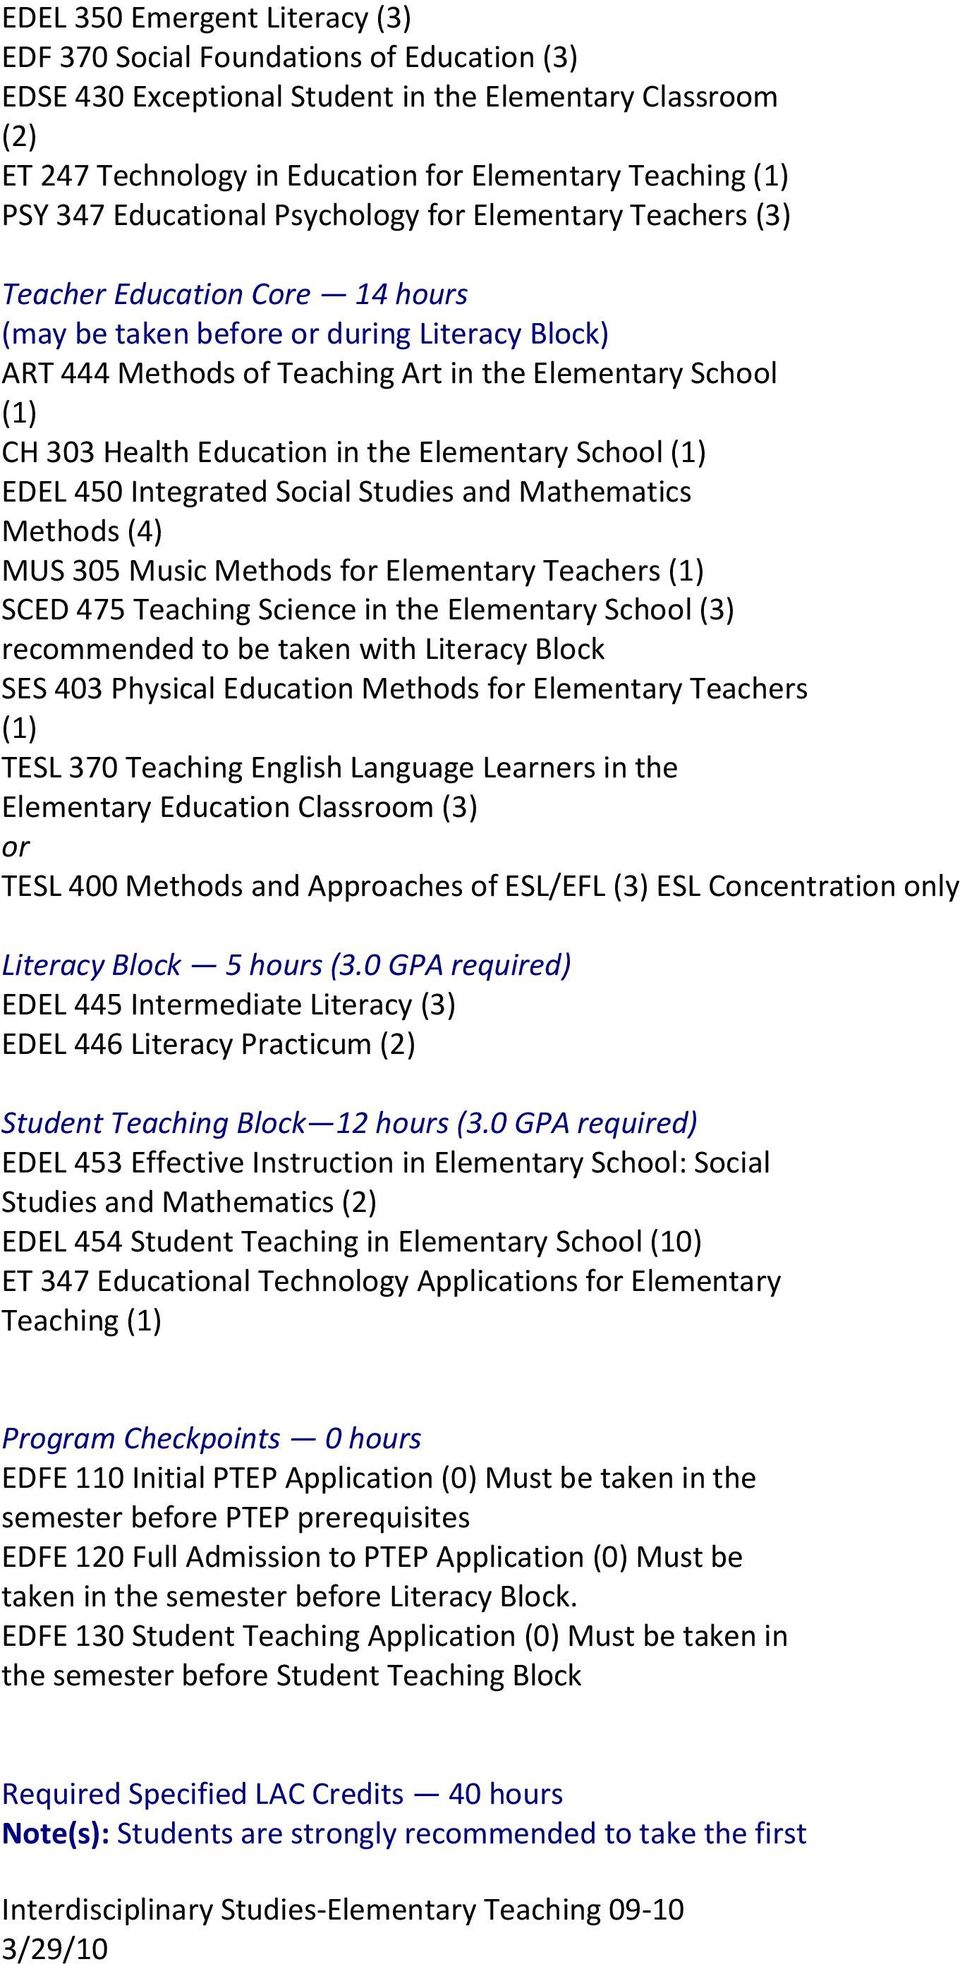 303 Health Education in the Elementary School (1) EDEL 450 Integrated Social Studies and Mathematics Methods (4) MUS 305 Music Methods for Elementary Teachers (1) SCED 475 Teaching Science in the